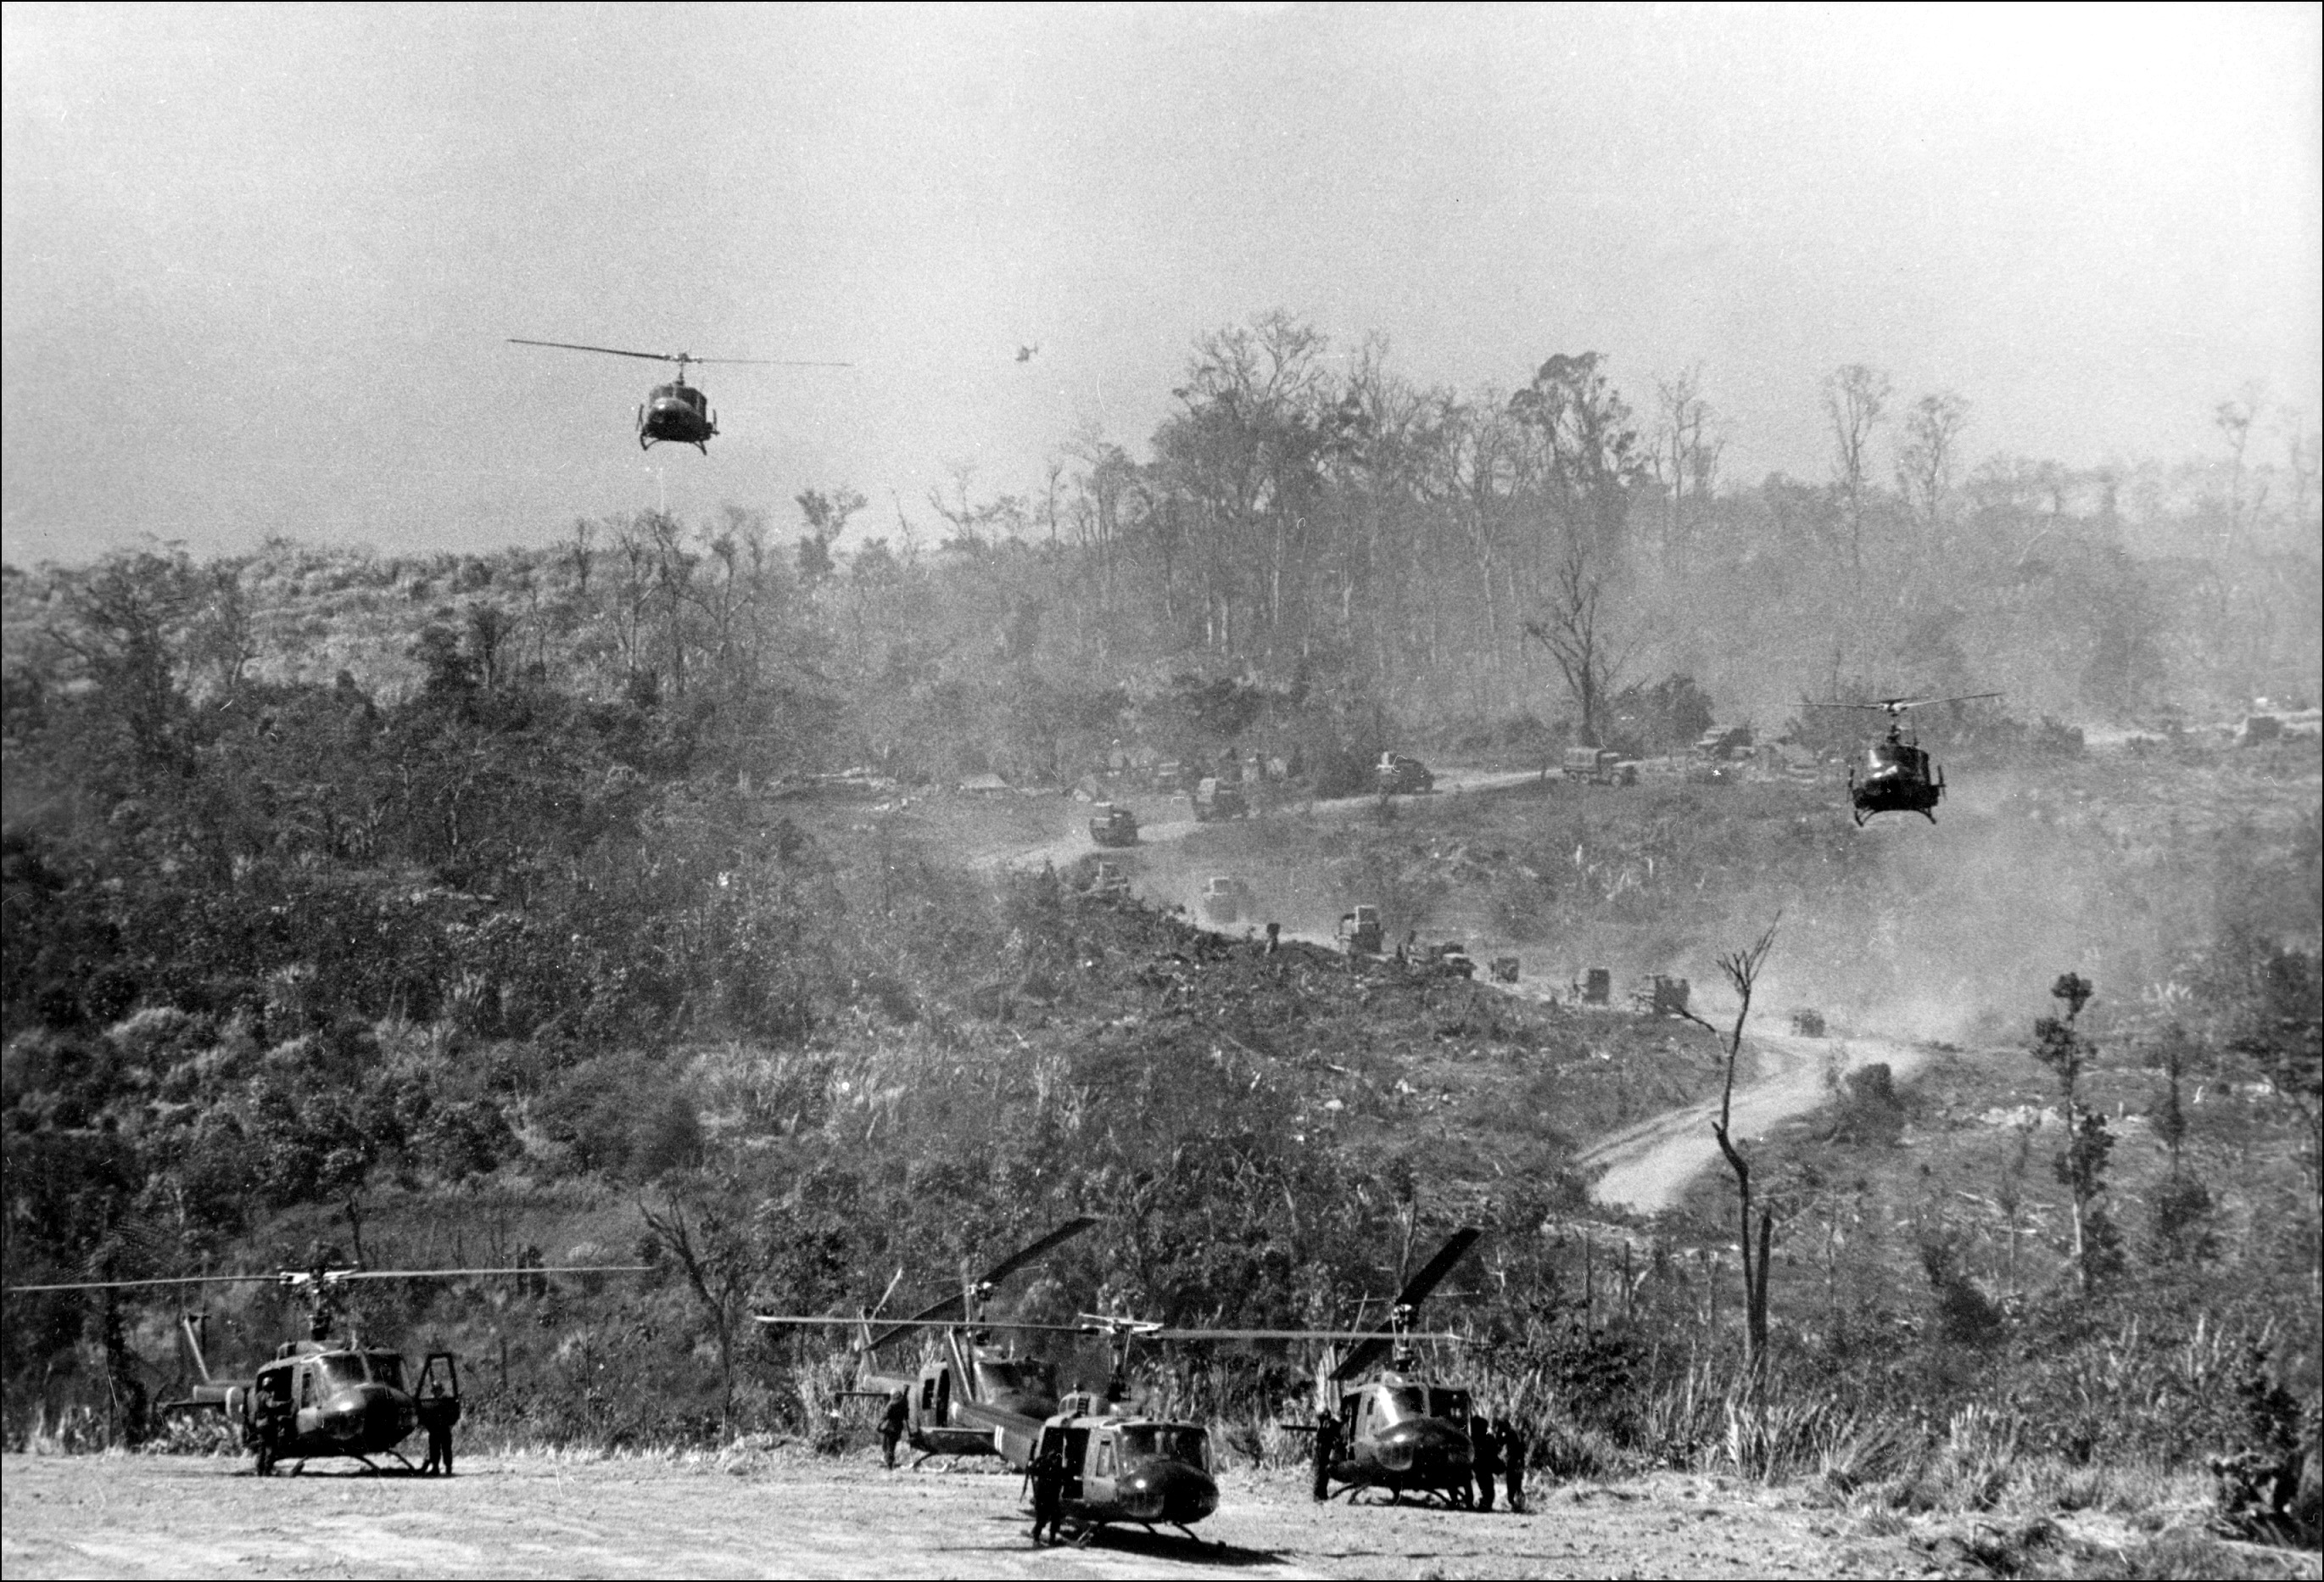 American helicopters land at Khe Sanh base on the Laos border on Feb. 1, 1971 after it was "reactivated" following a Vitcong offensive in Laos. (AFP/Getty Images)